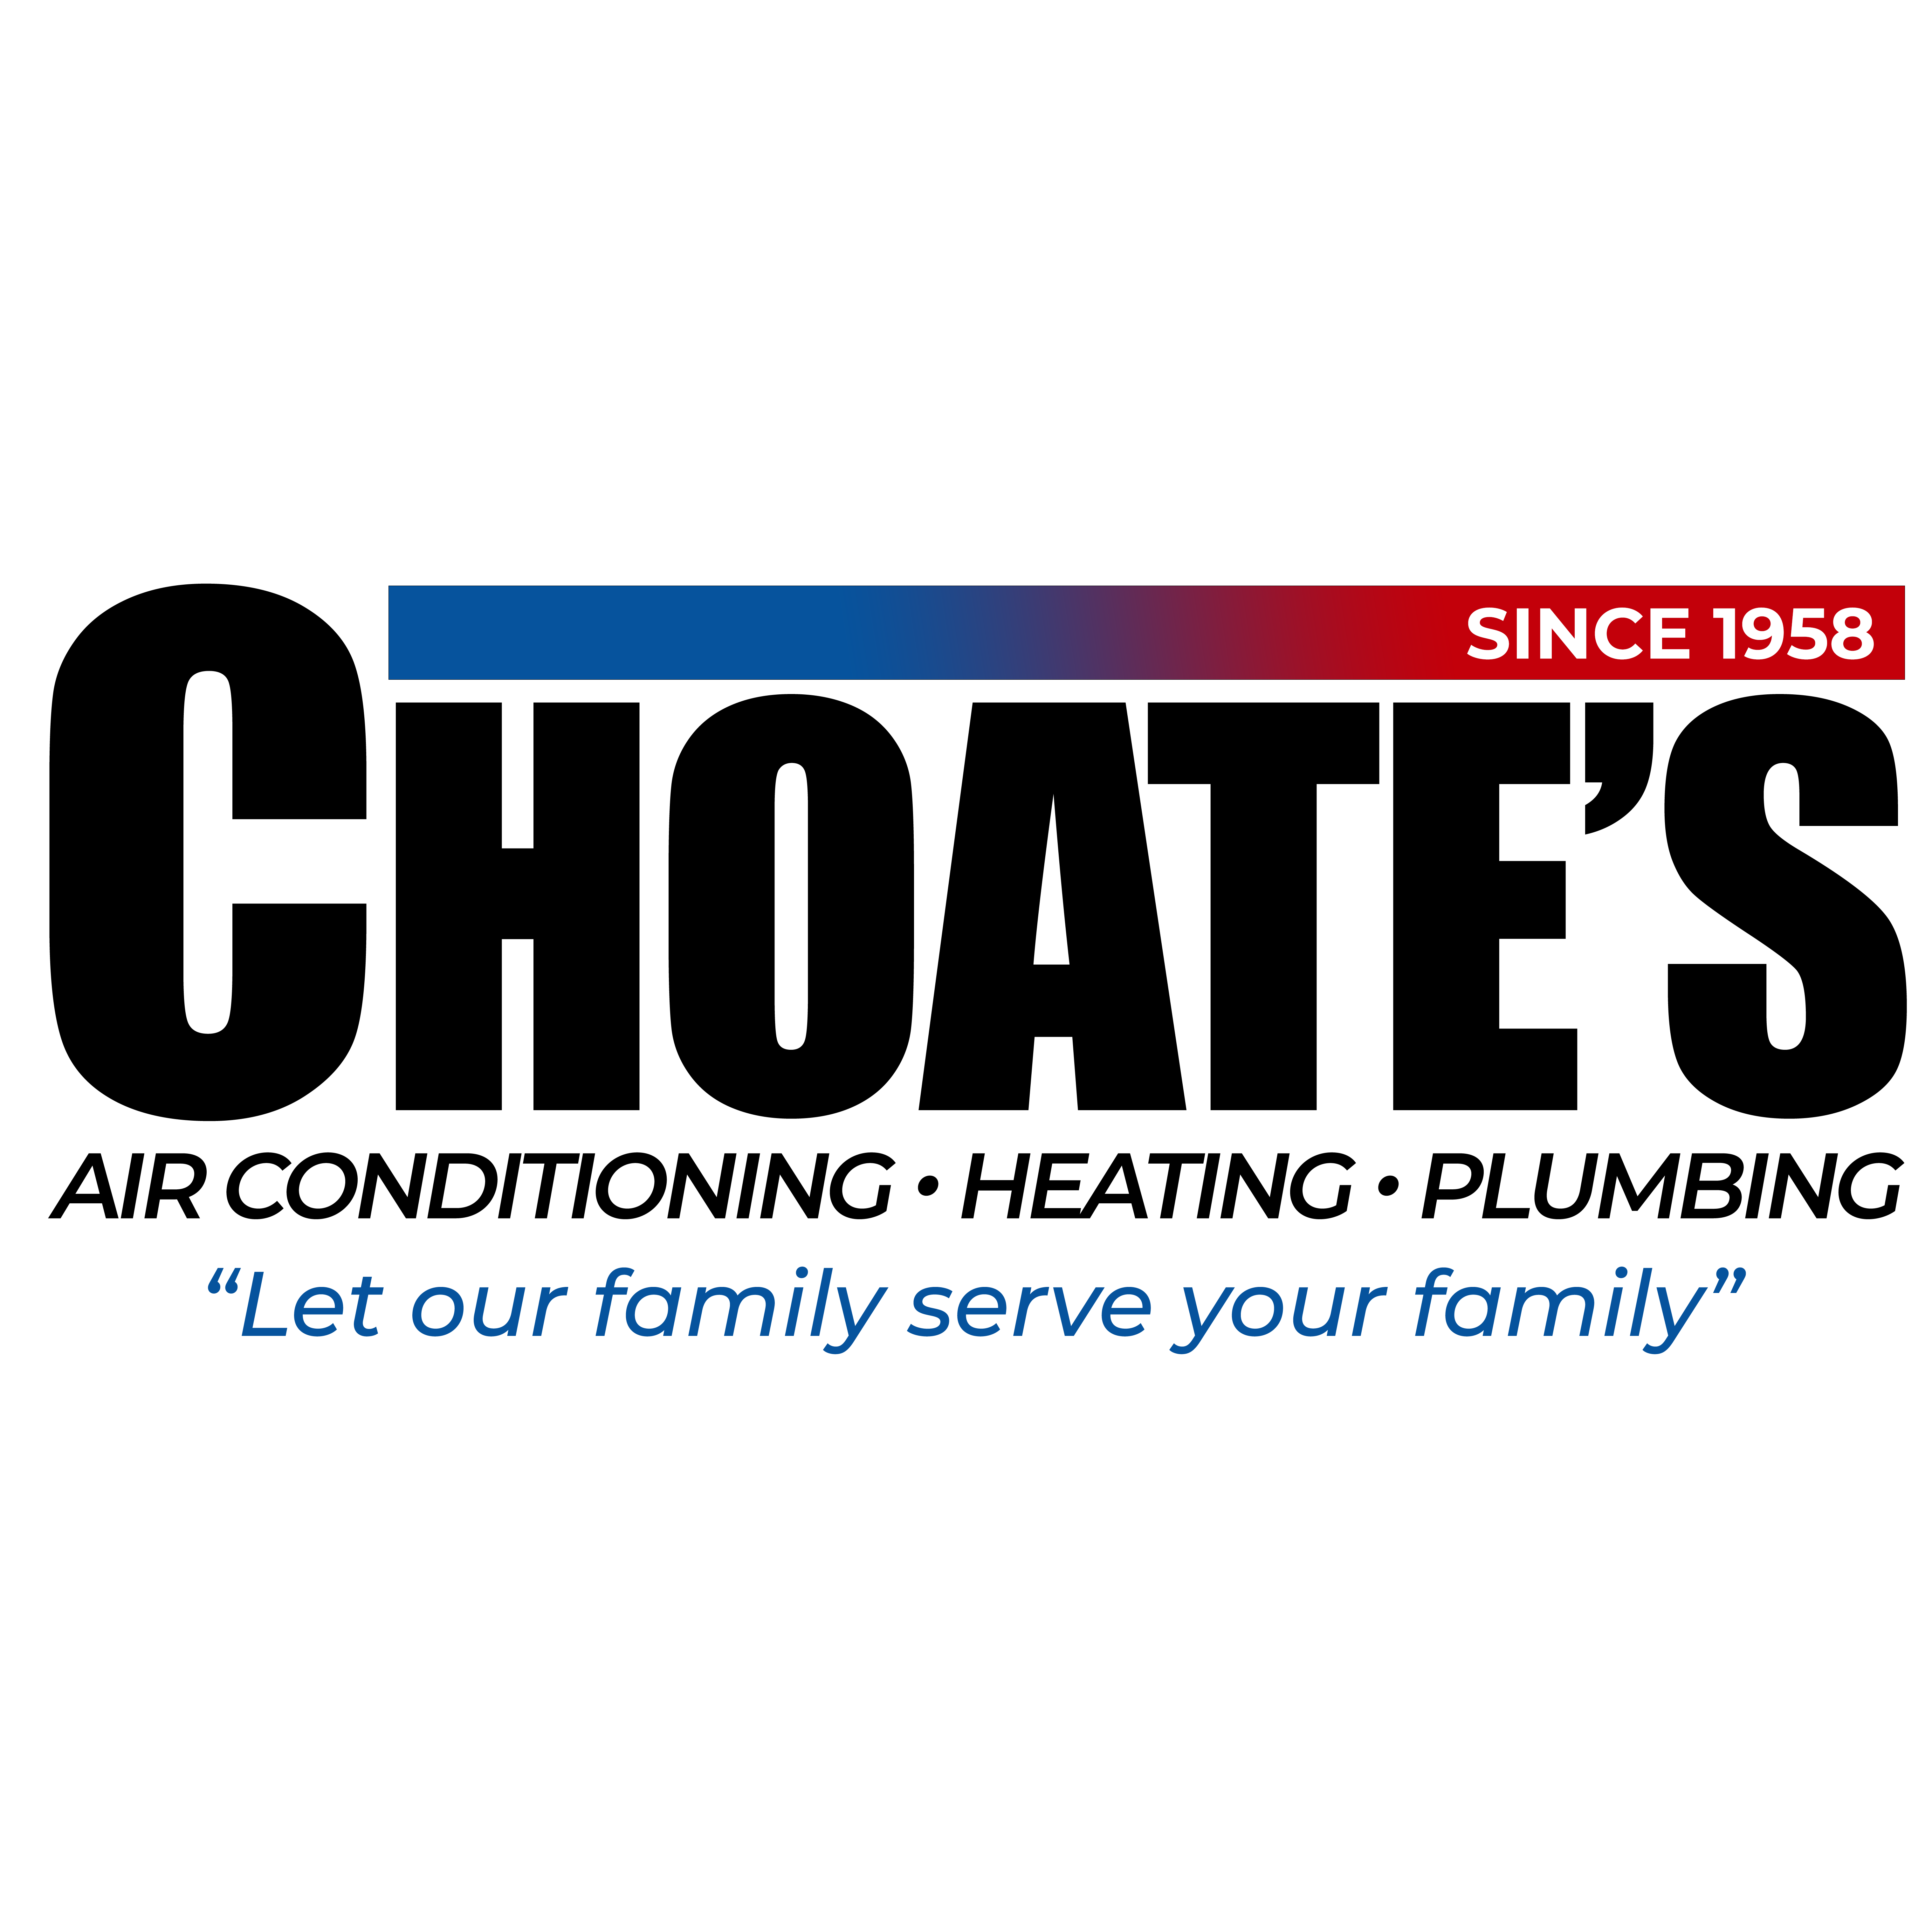 Choate's Air Conditioning, Heating And Plumbing - Collierville, TN 38017 - (901)347-8078 | ShowMeLocal.com